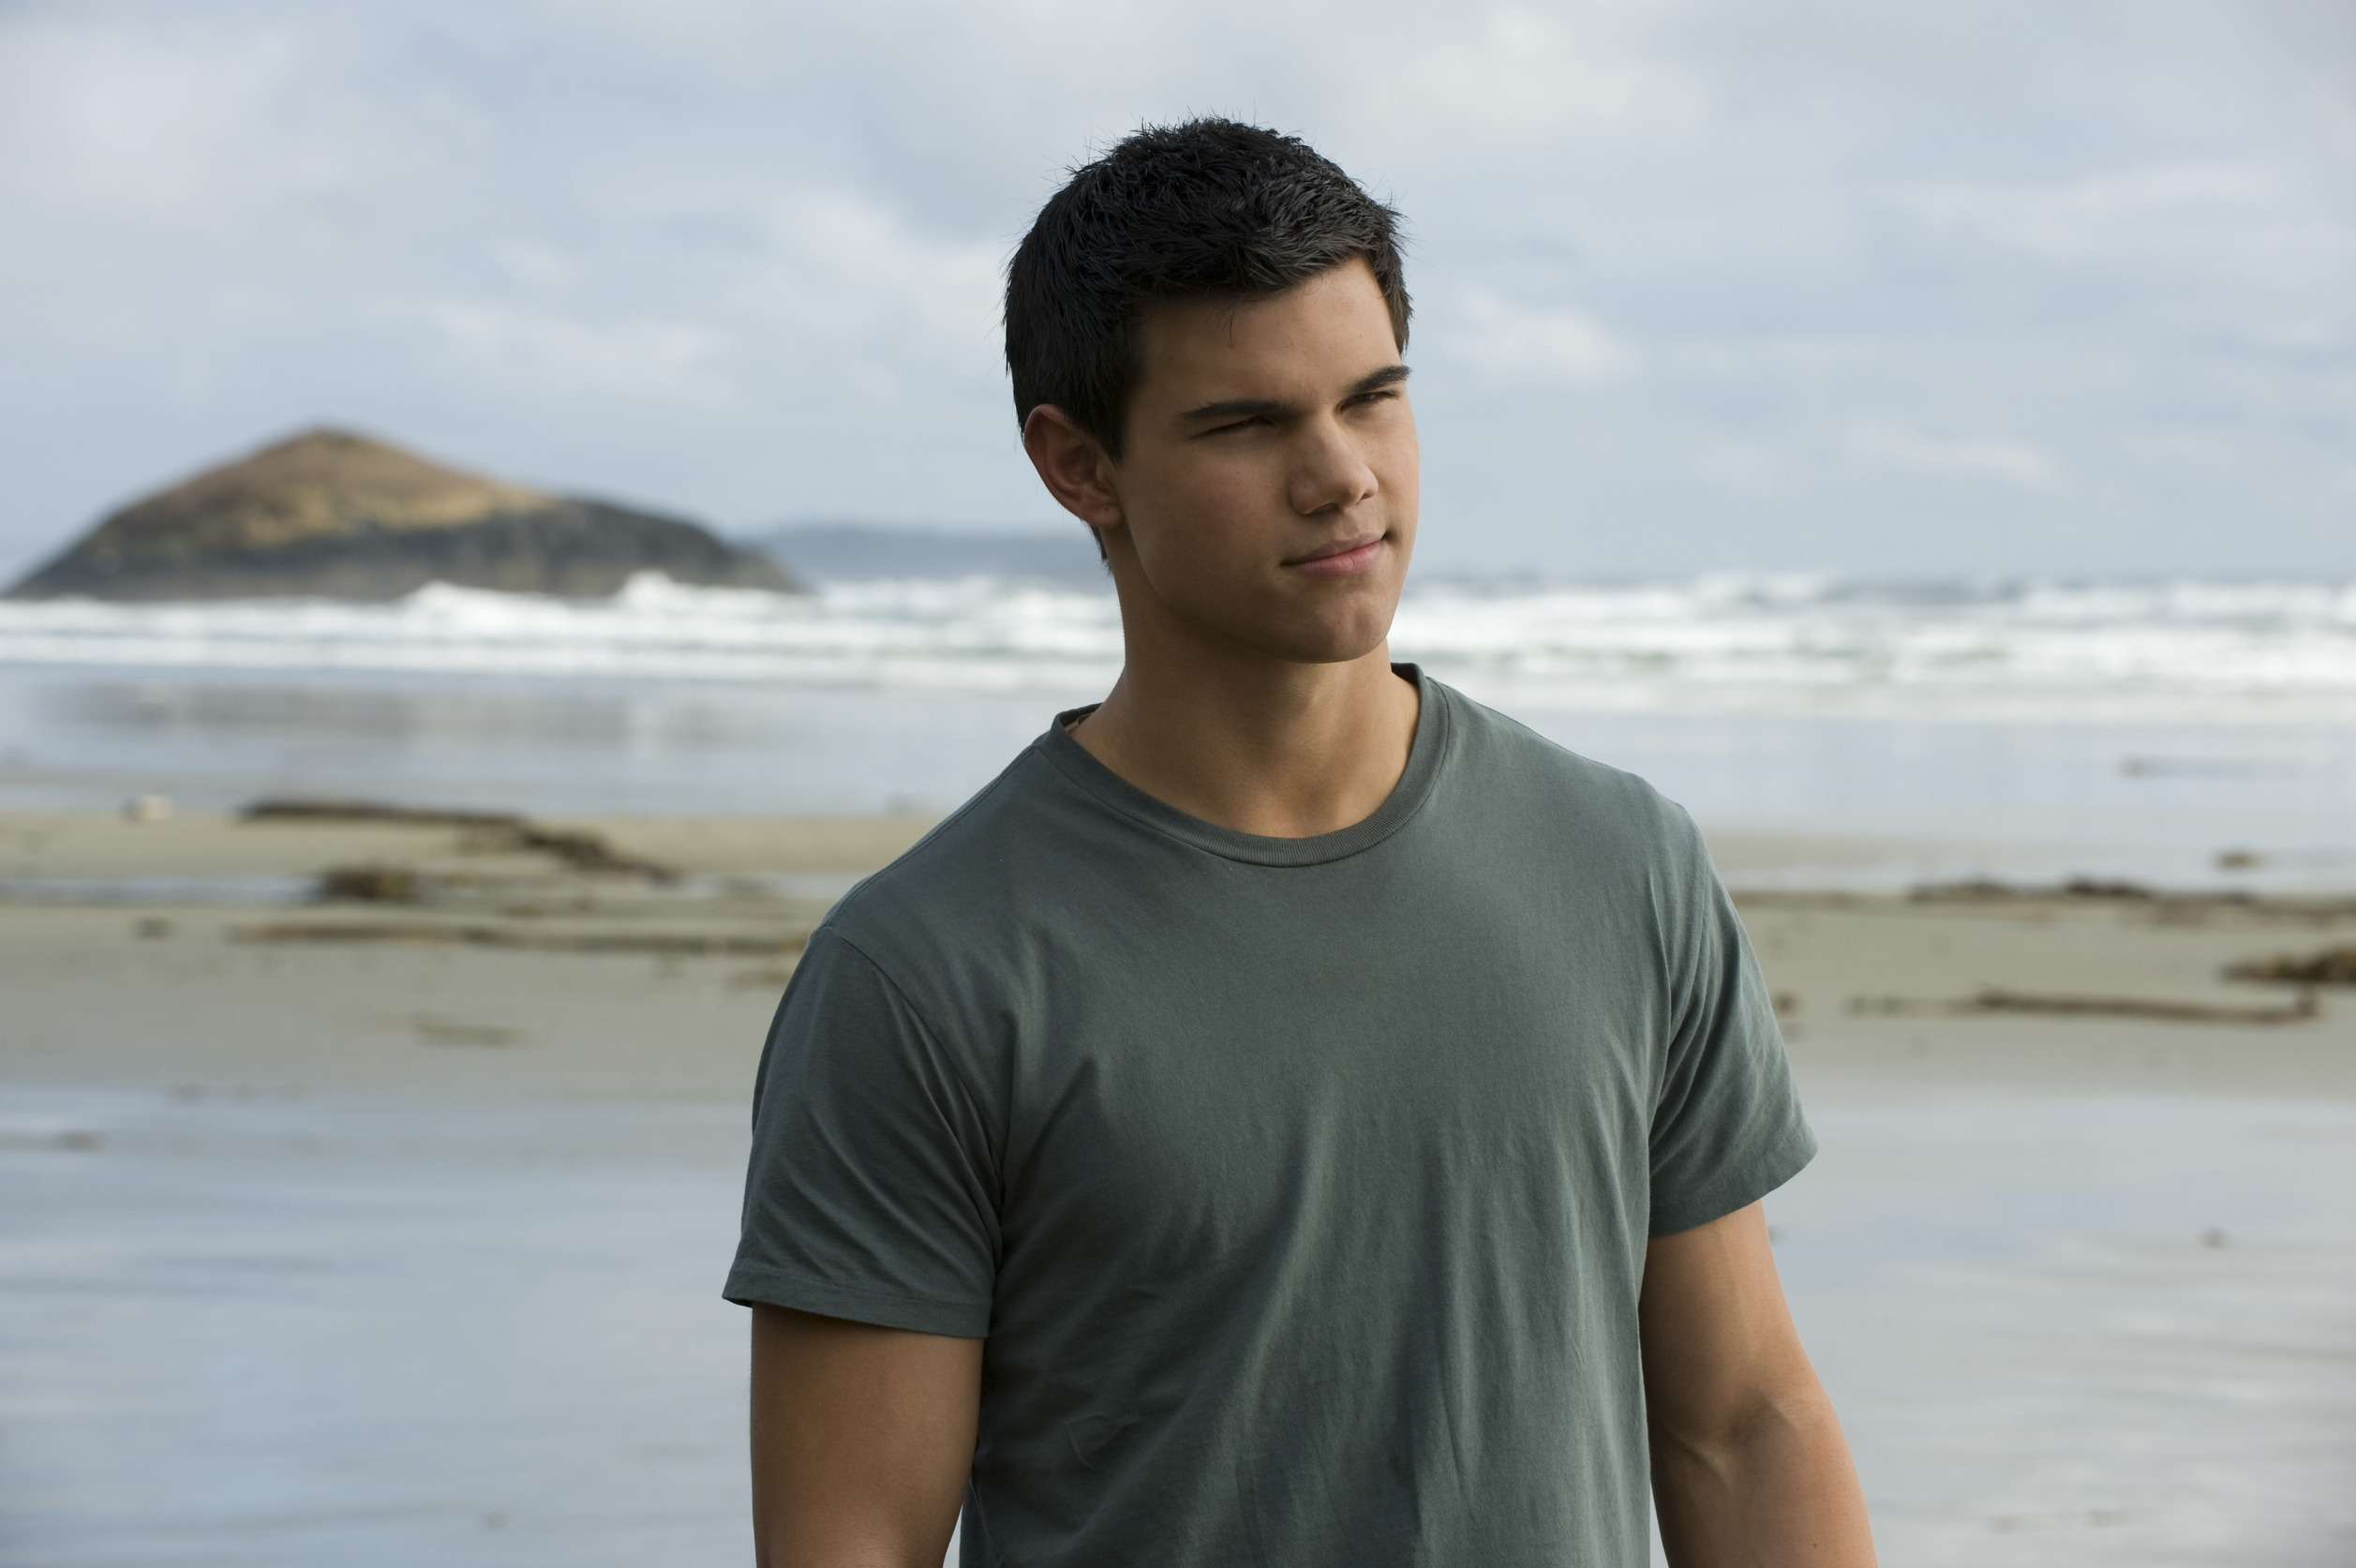 Taylor Lautner in Eclipse